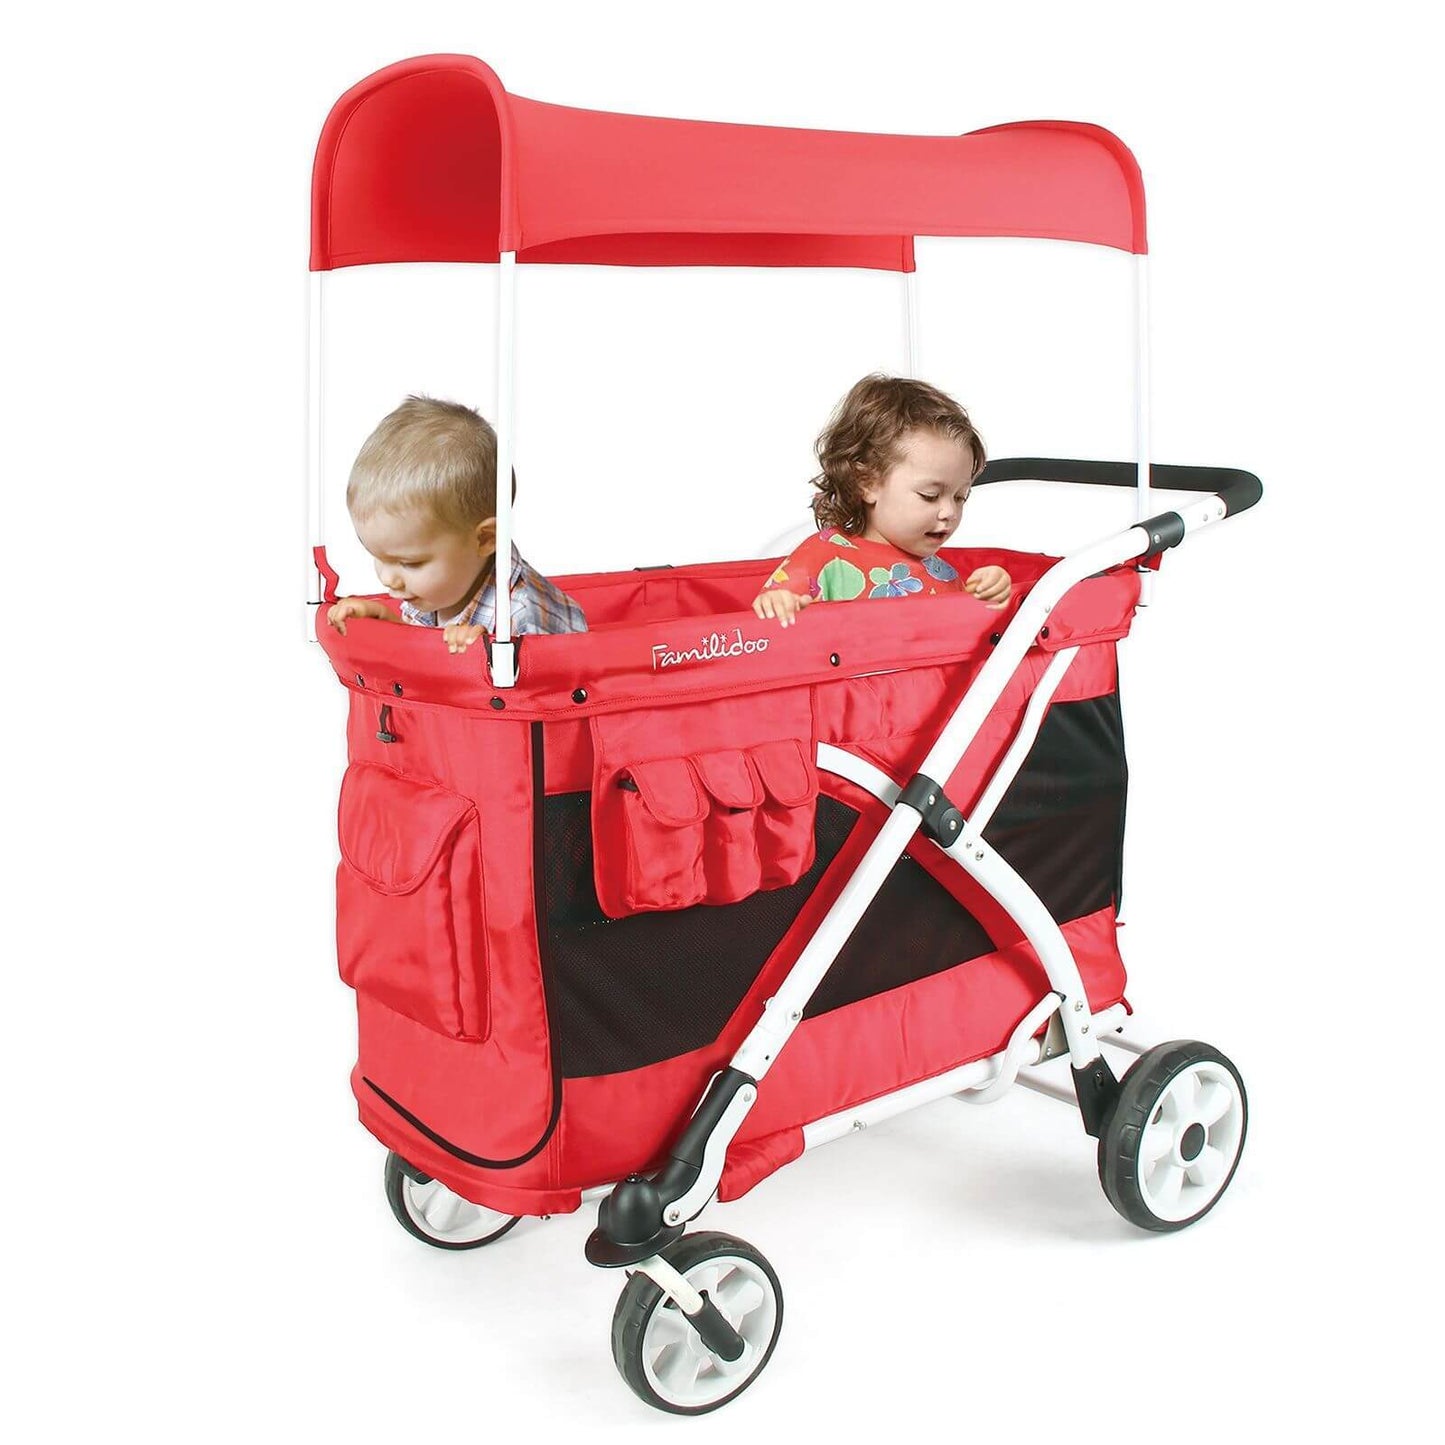 MJ04 Chariot Milioo (Multi-Function Heavy Duty Twin Stroller Wagon, Push Only)